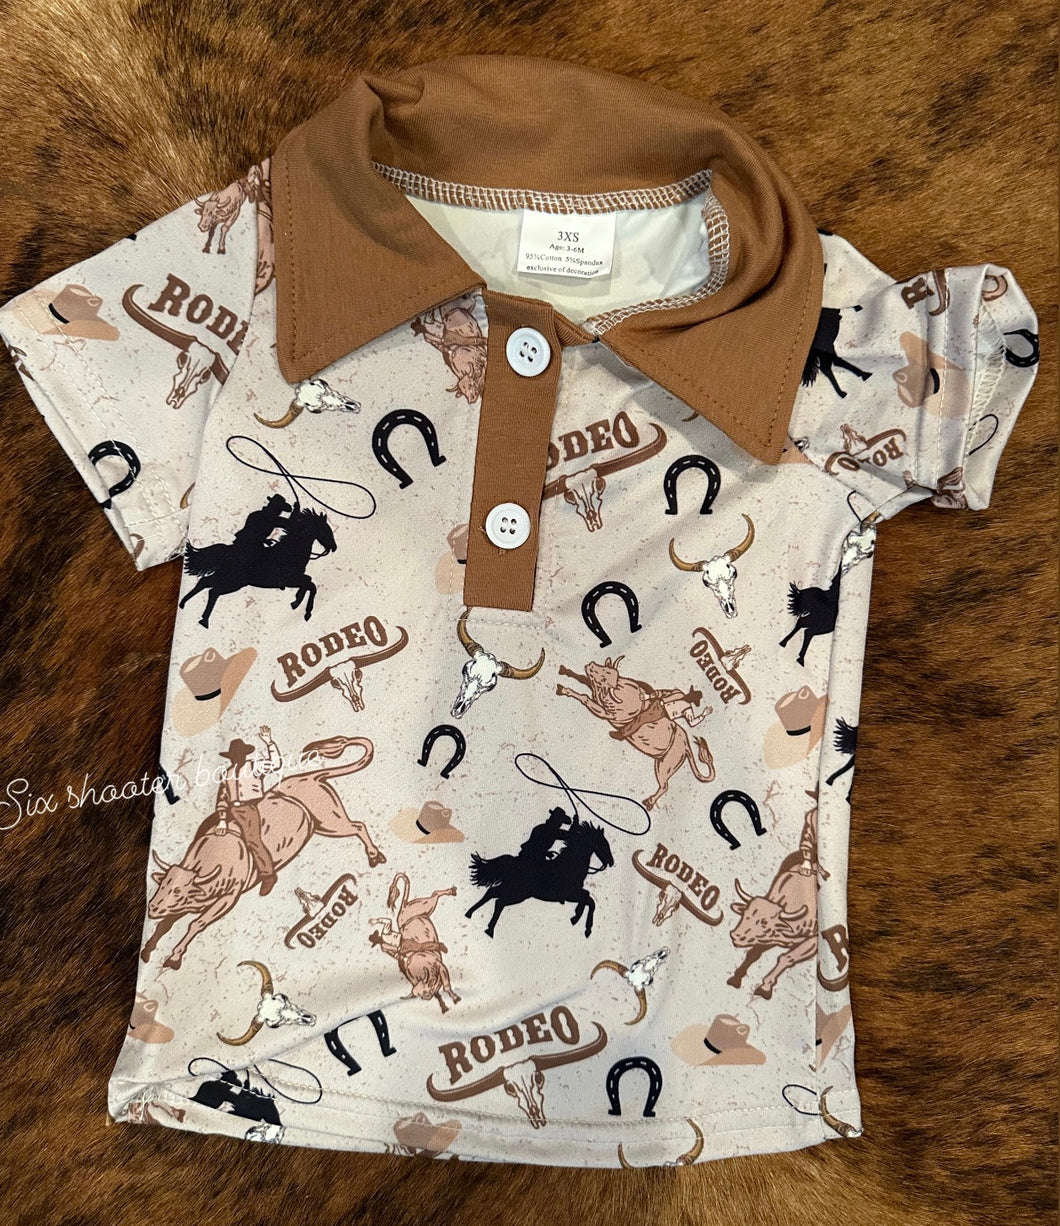 Rodeo baby polo tee